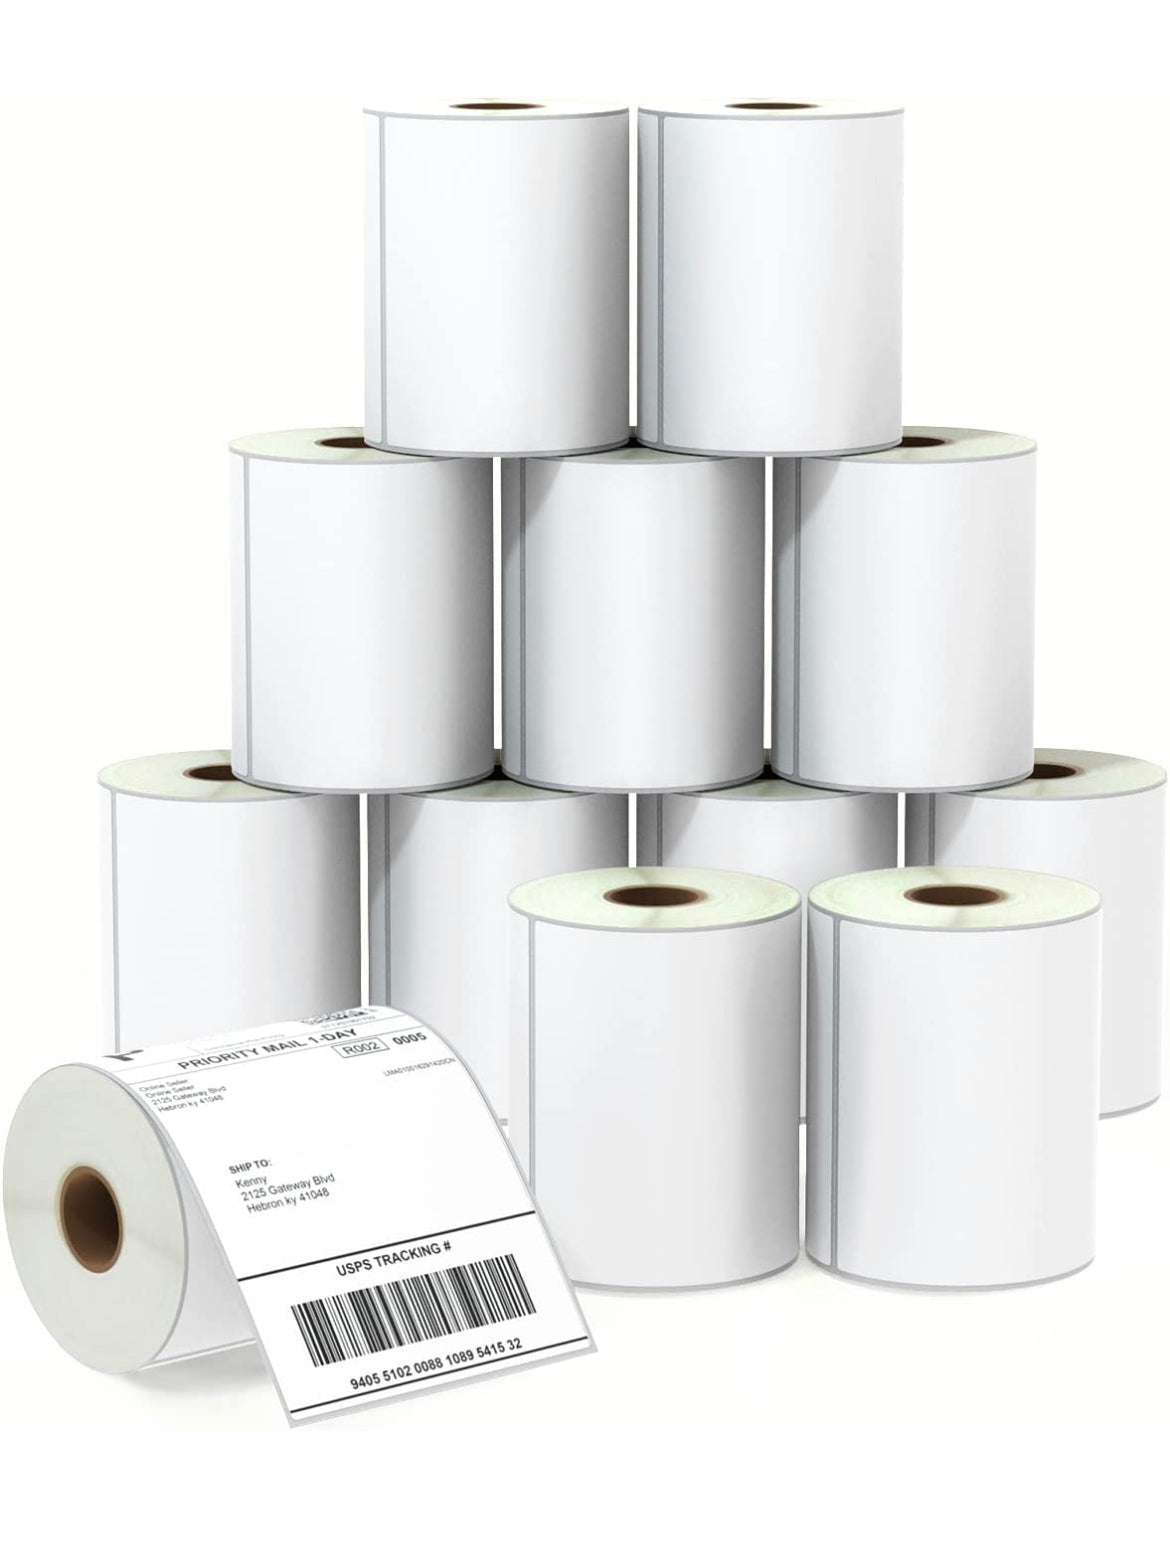 4” x 6” Direct Thermal Labels, 1” Core, 250 Labels/Roll (12 Rolls)